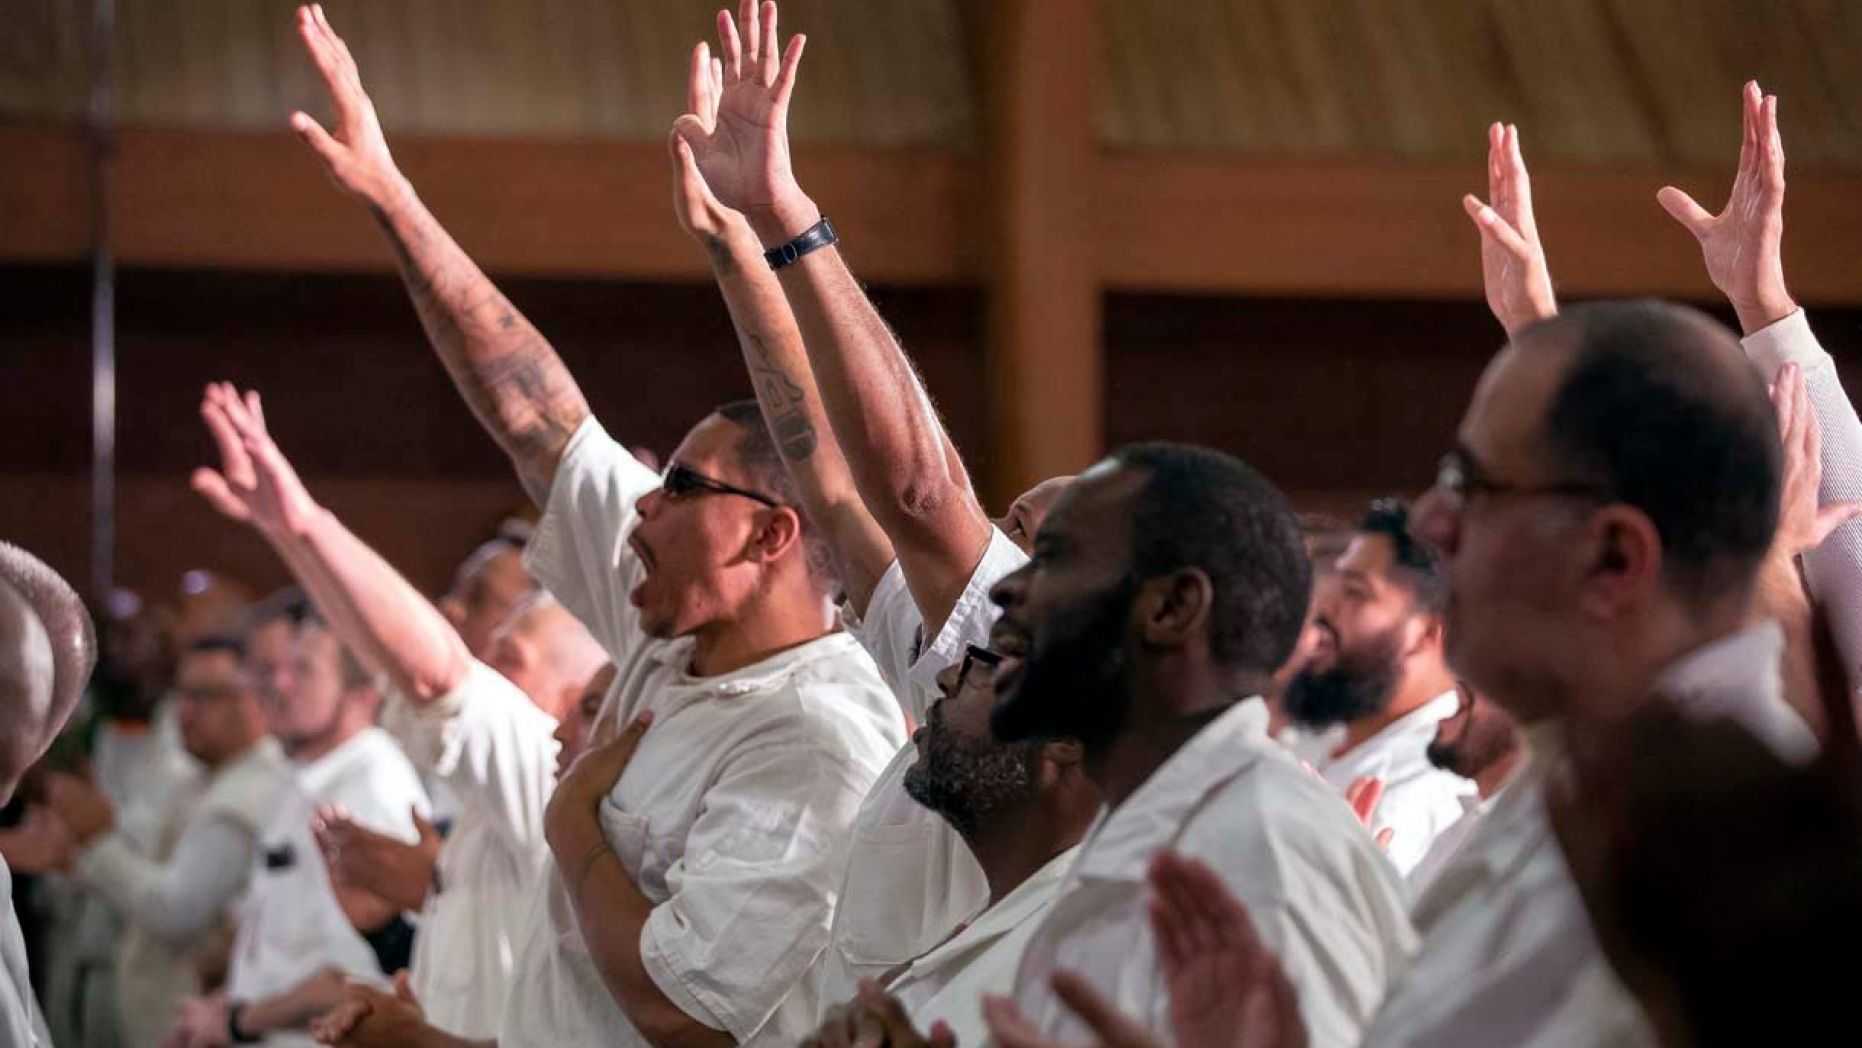 Inmates at the Coffield Unit, a maximum security prison in Anderson County, Texas, worship during a church service. They are part of the newest campus for Gateway Church of Dallas, Texas. (Gateway Church)